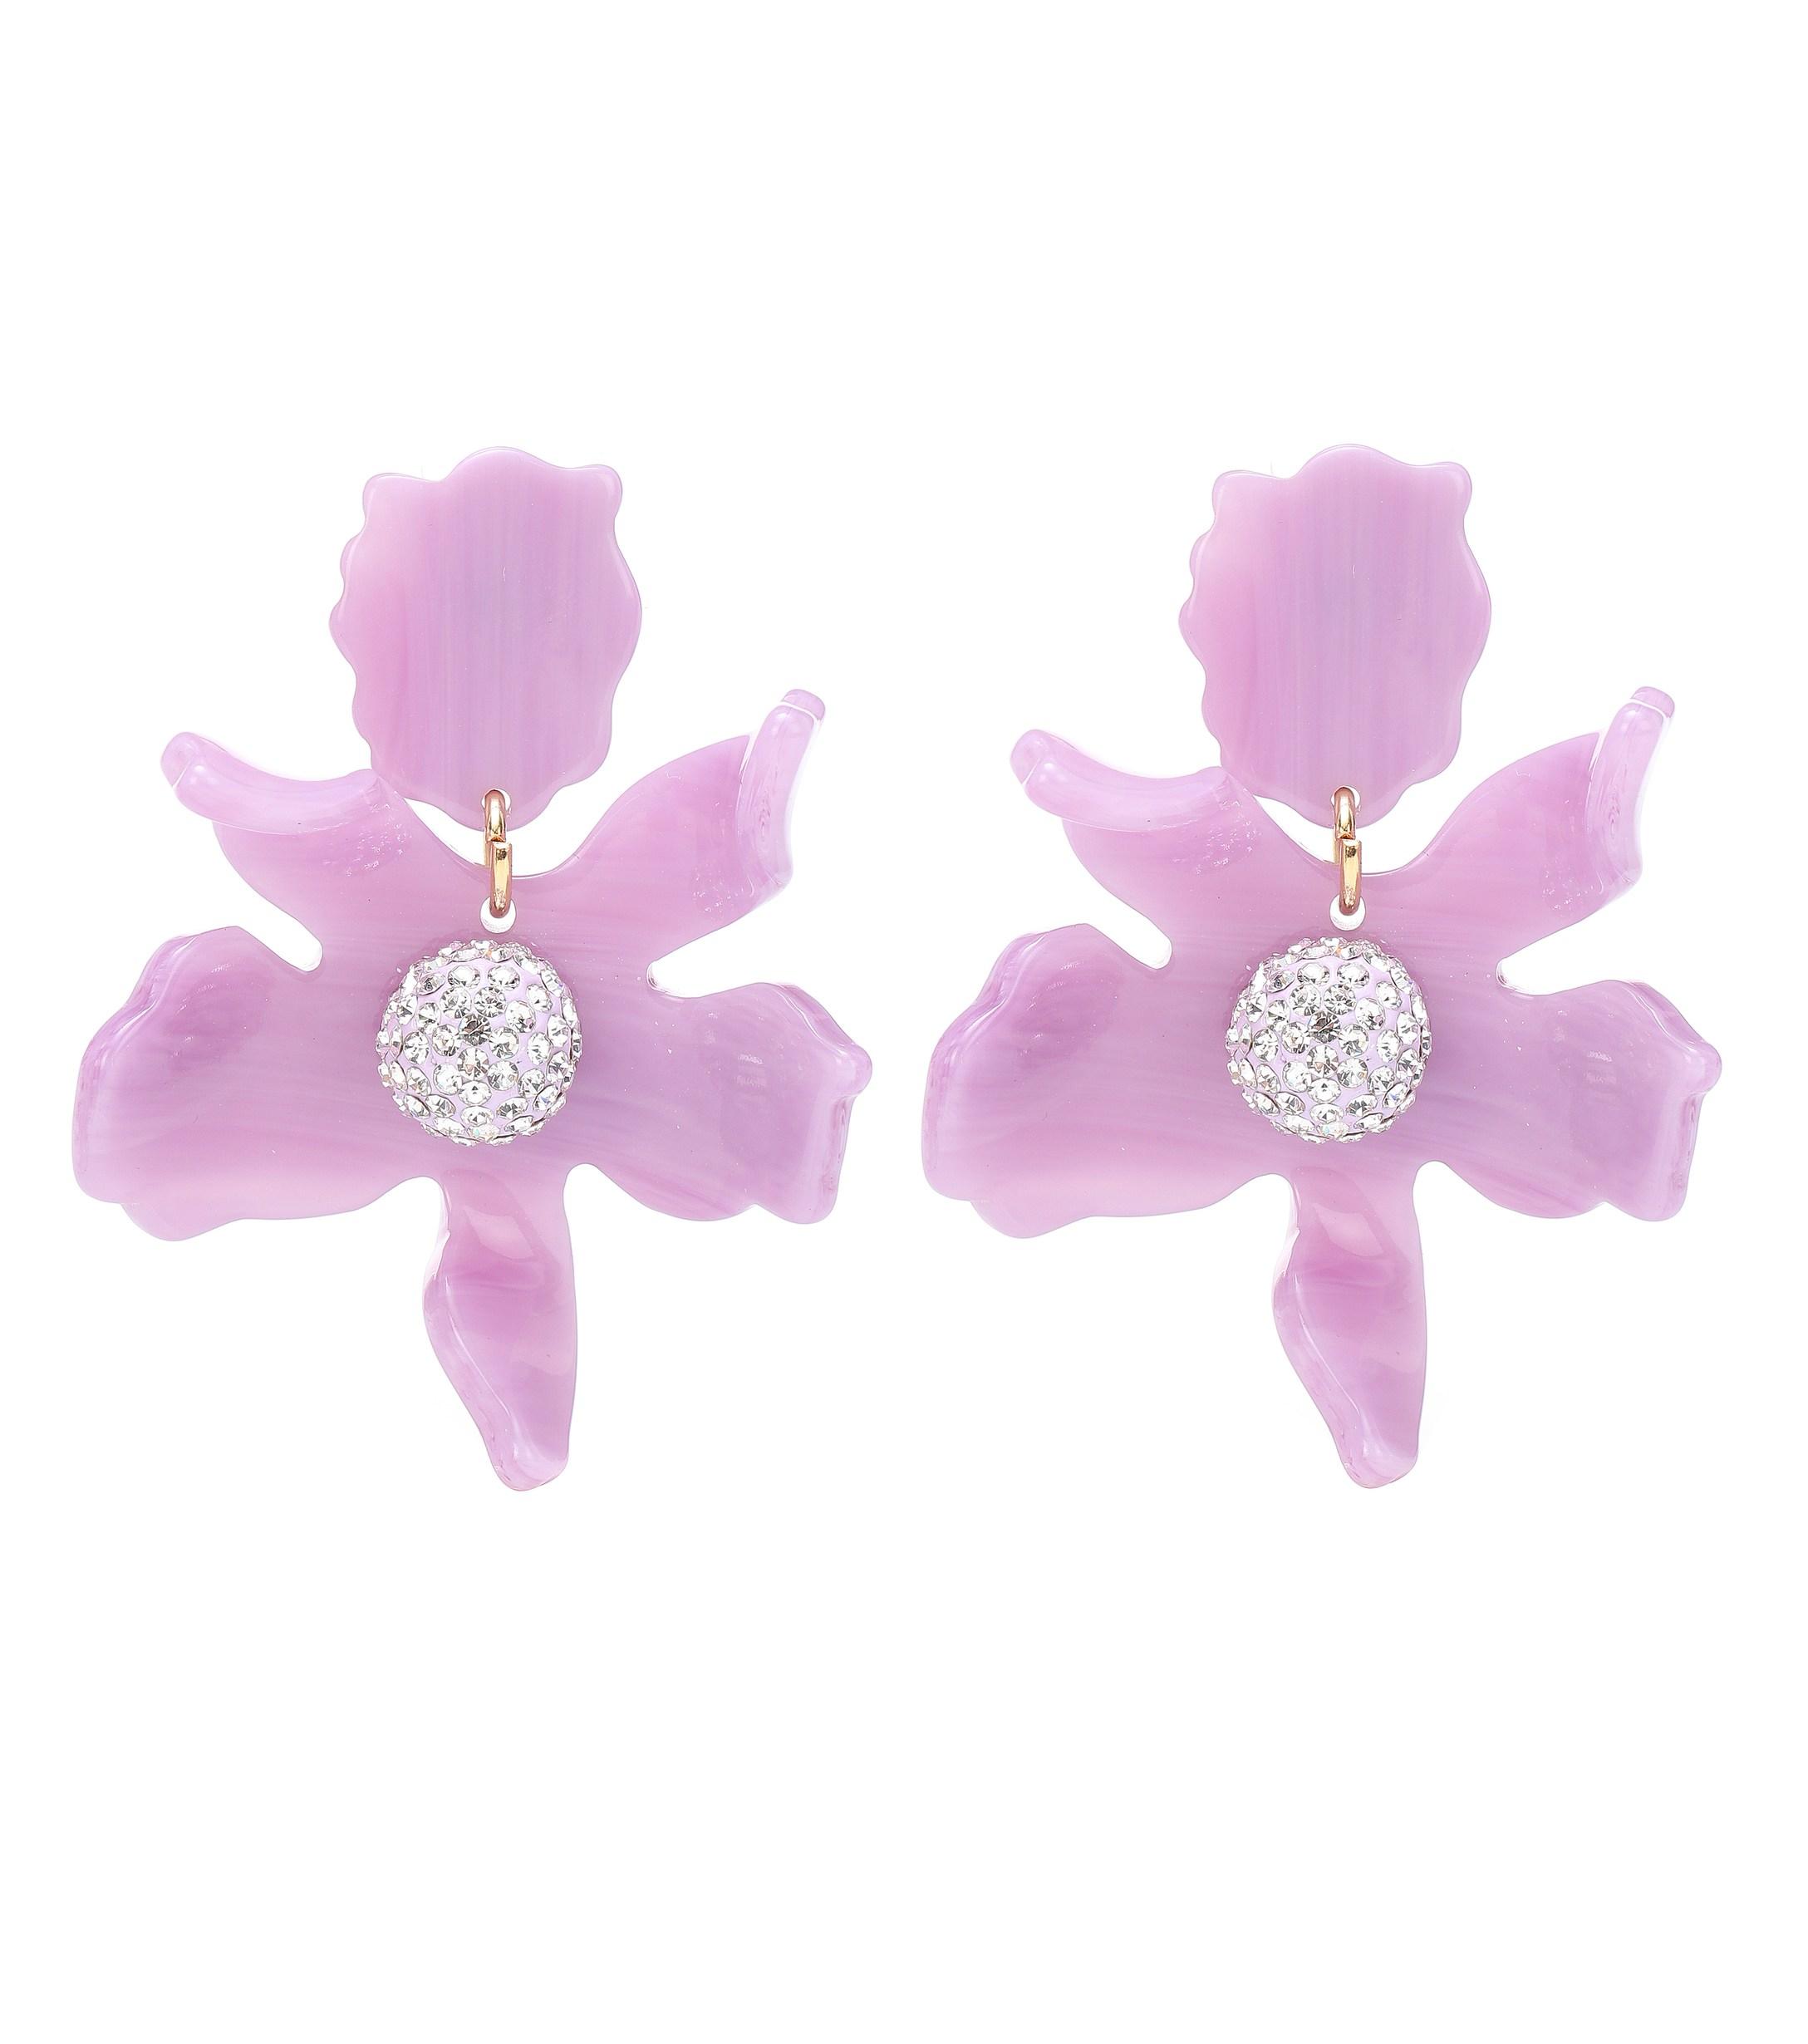 Lele Sadoughi Small Crystal Lily Earring in Lilac (Purple) - Lyst